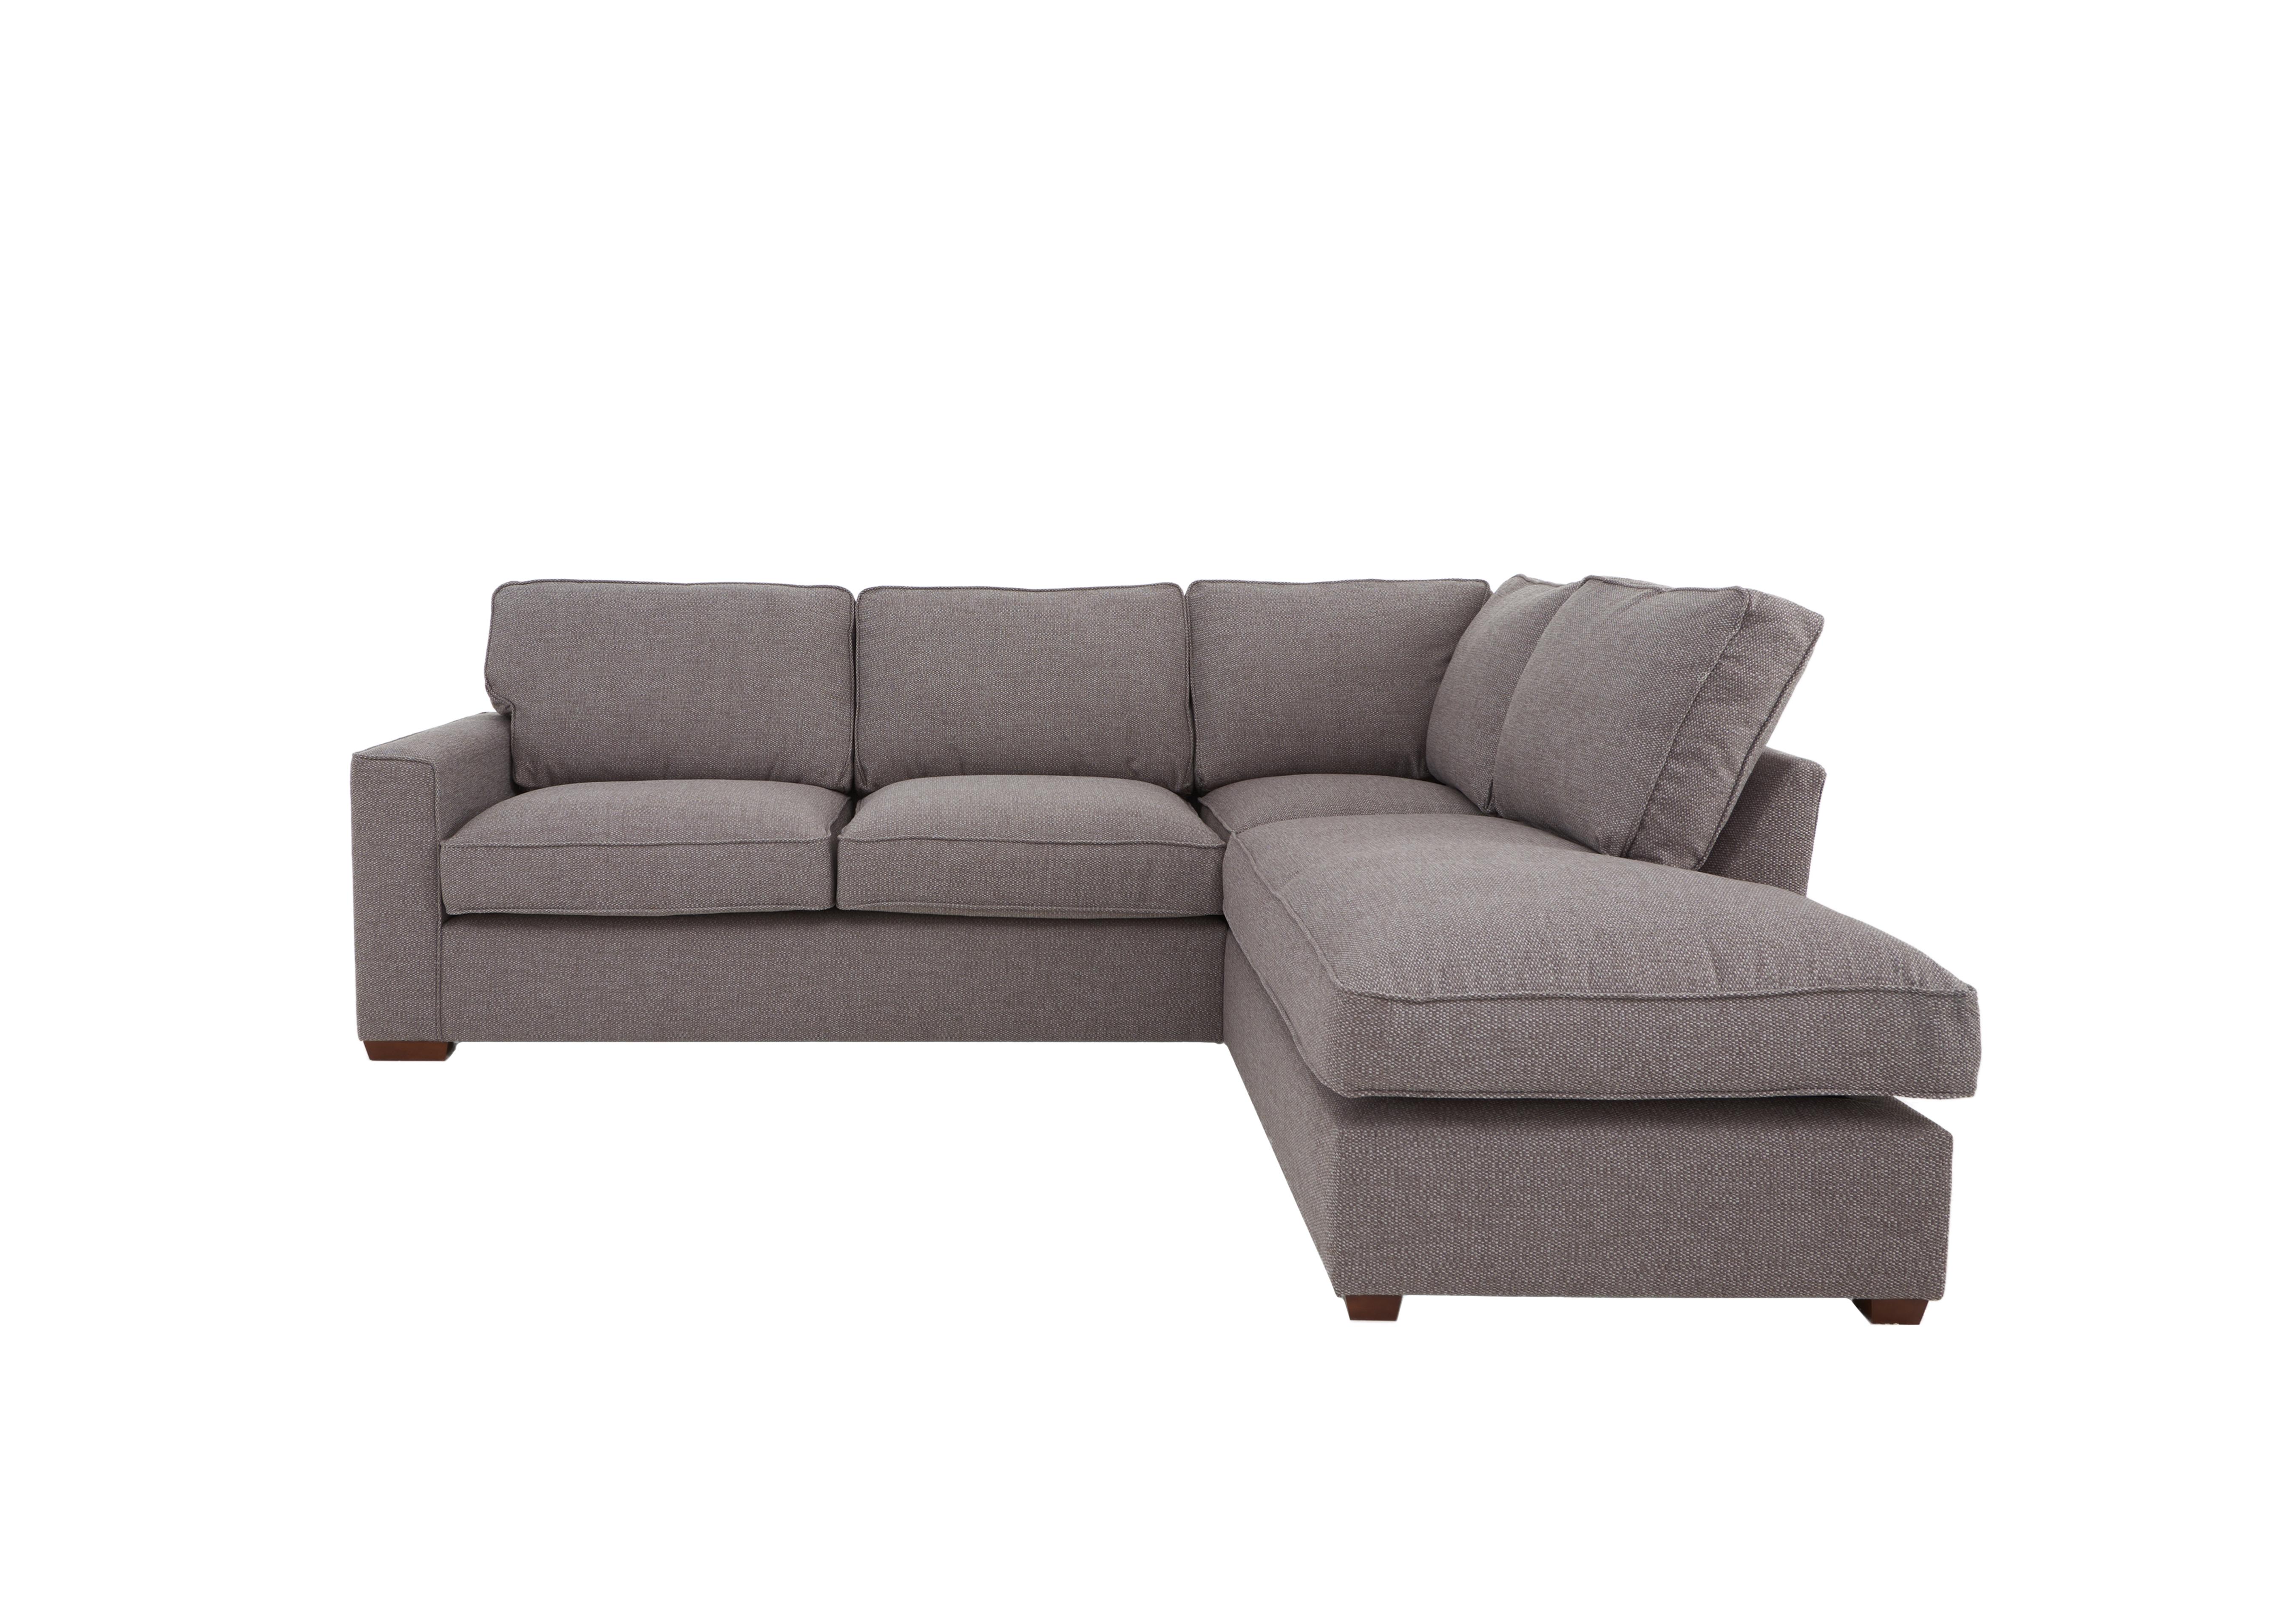 Cory Fabric Corner Chaise Classic Back Sofa Bed in Dallas Taupe on Furniture Village